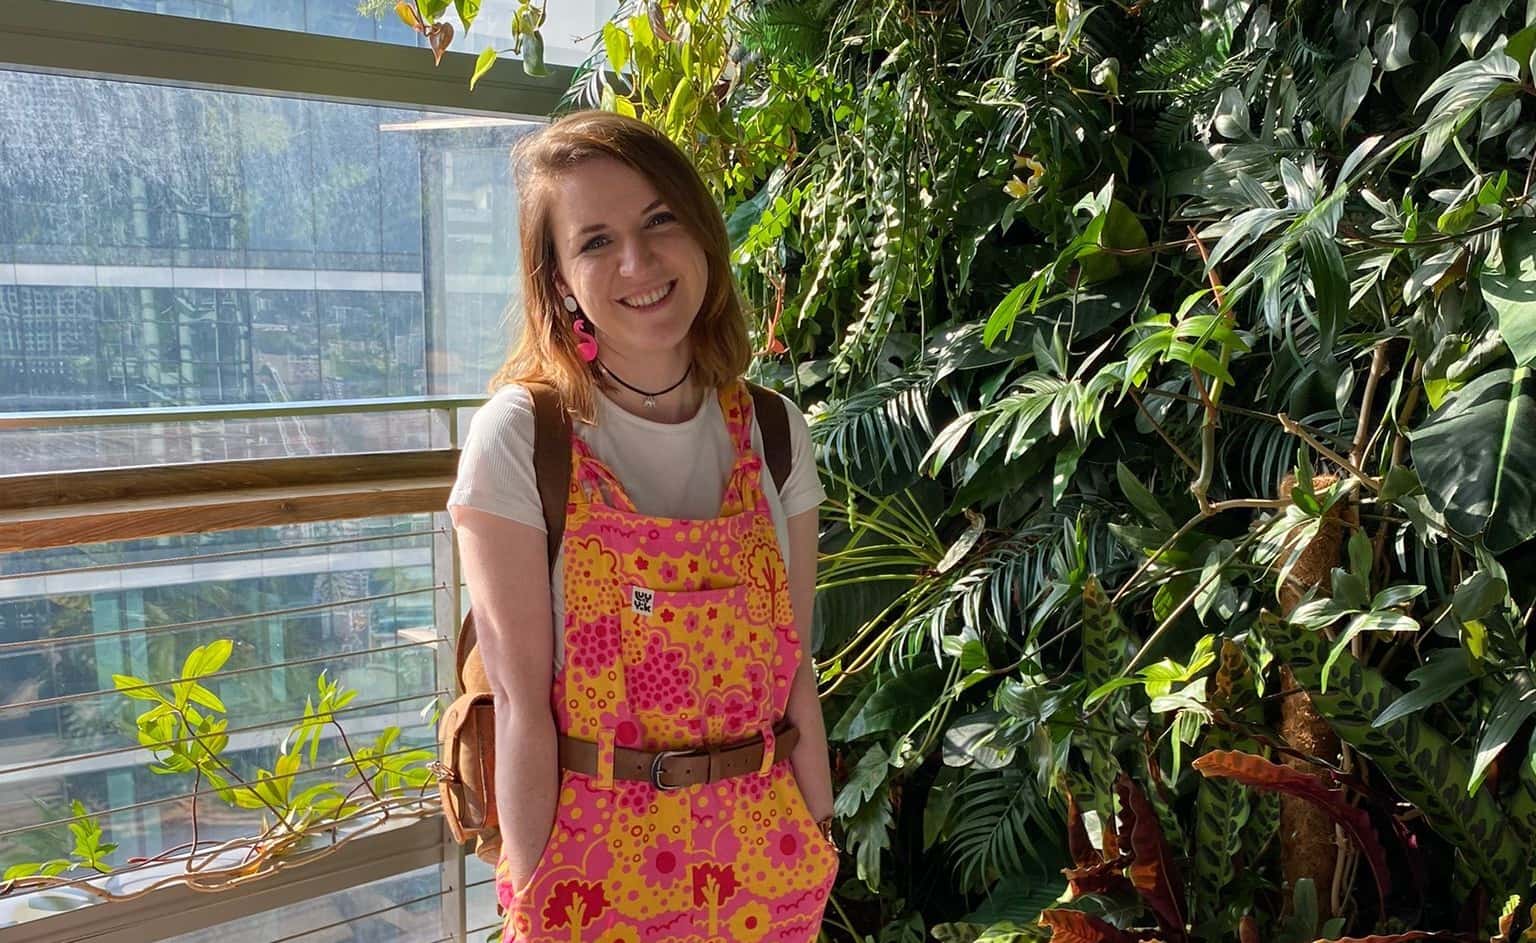 Our £25,000 jackpot winner, Harriet, standing in front of a backdrop of plants and a large window with a view over London.